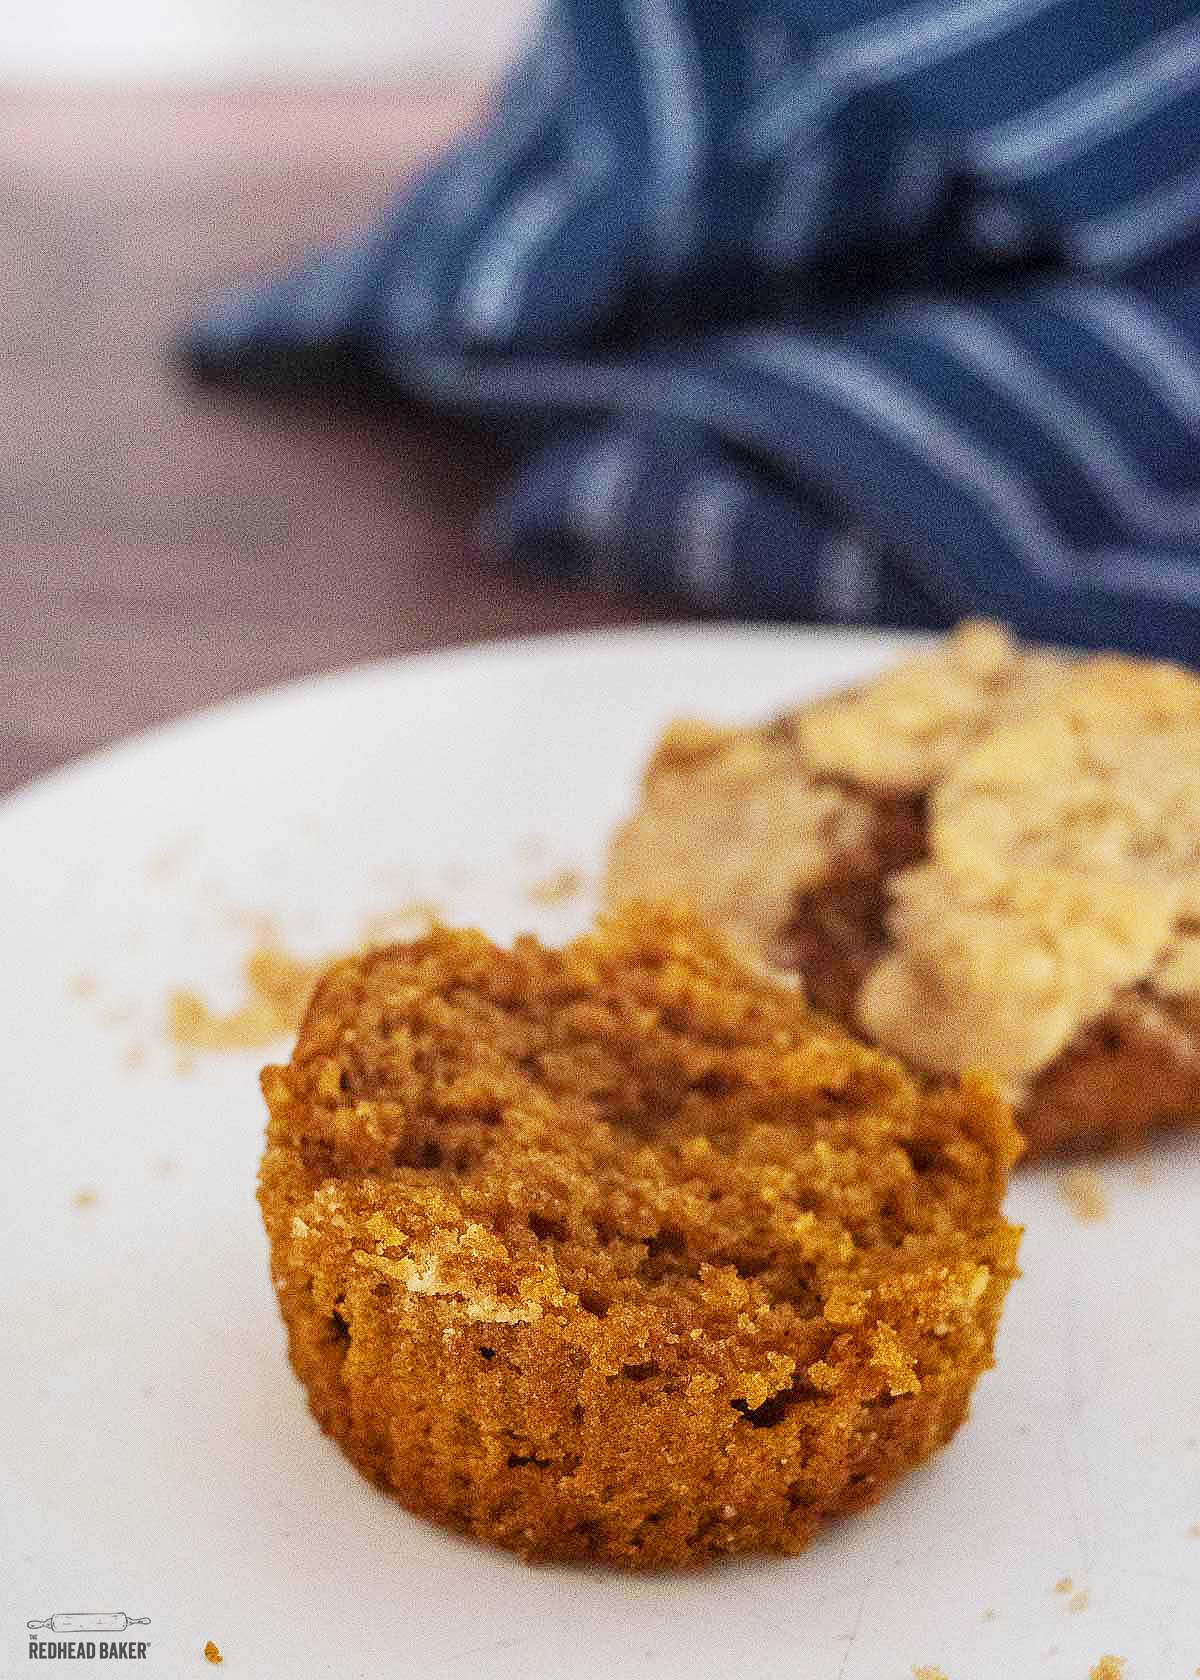 The bottom half of a pumpkin muffin in the foreground with the muffin top in the background.